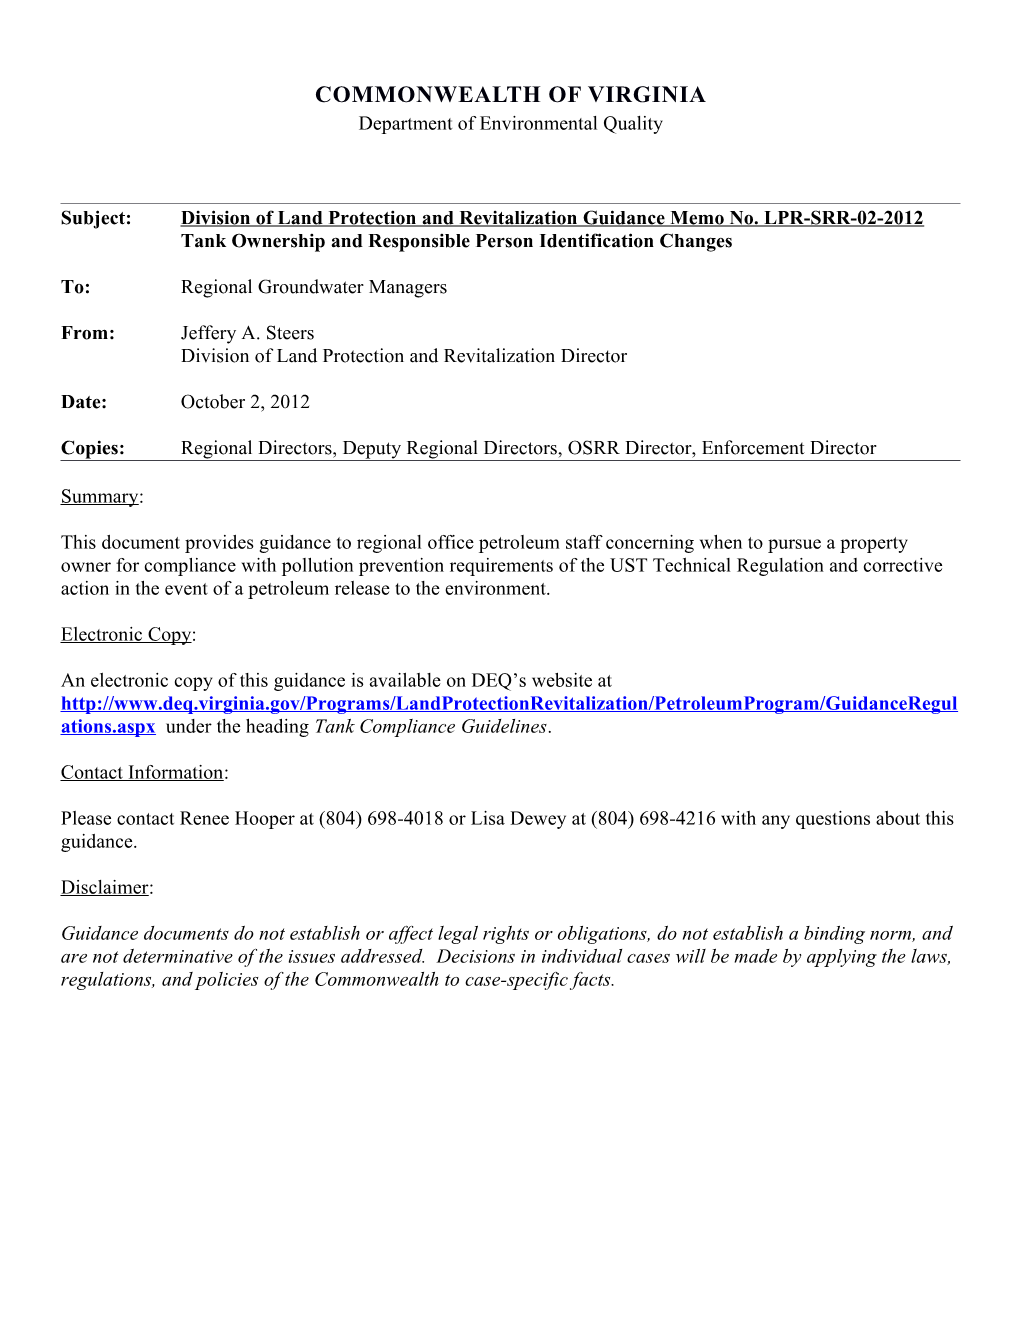 Subject: Division of Land Protection and Revitalization Guidance Memo No. LPR-SRR-02-2012